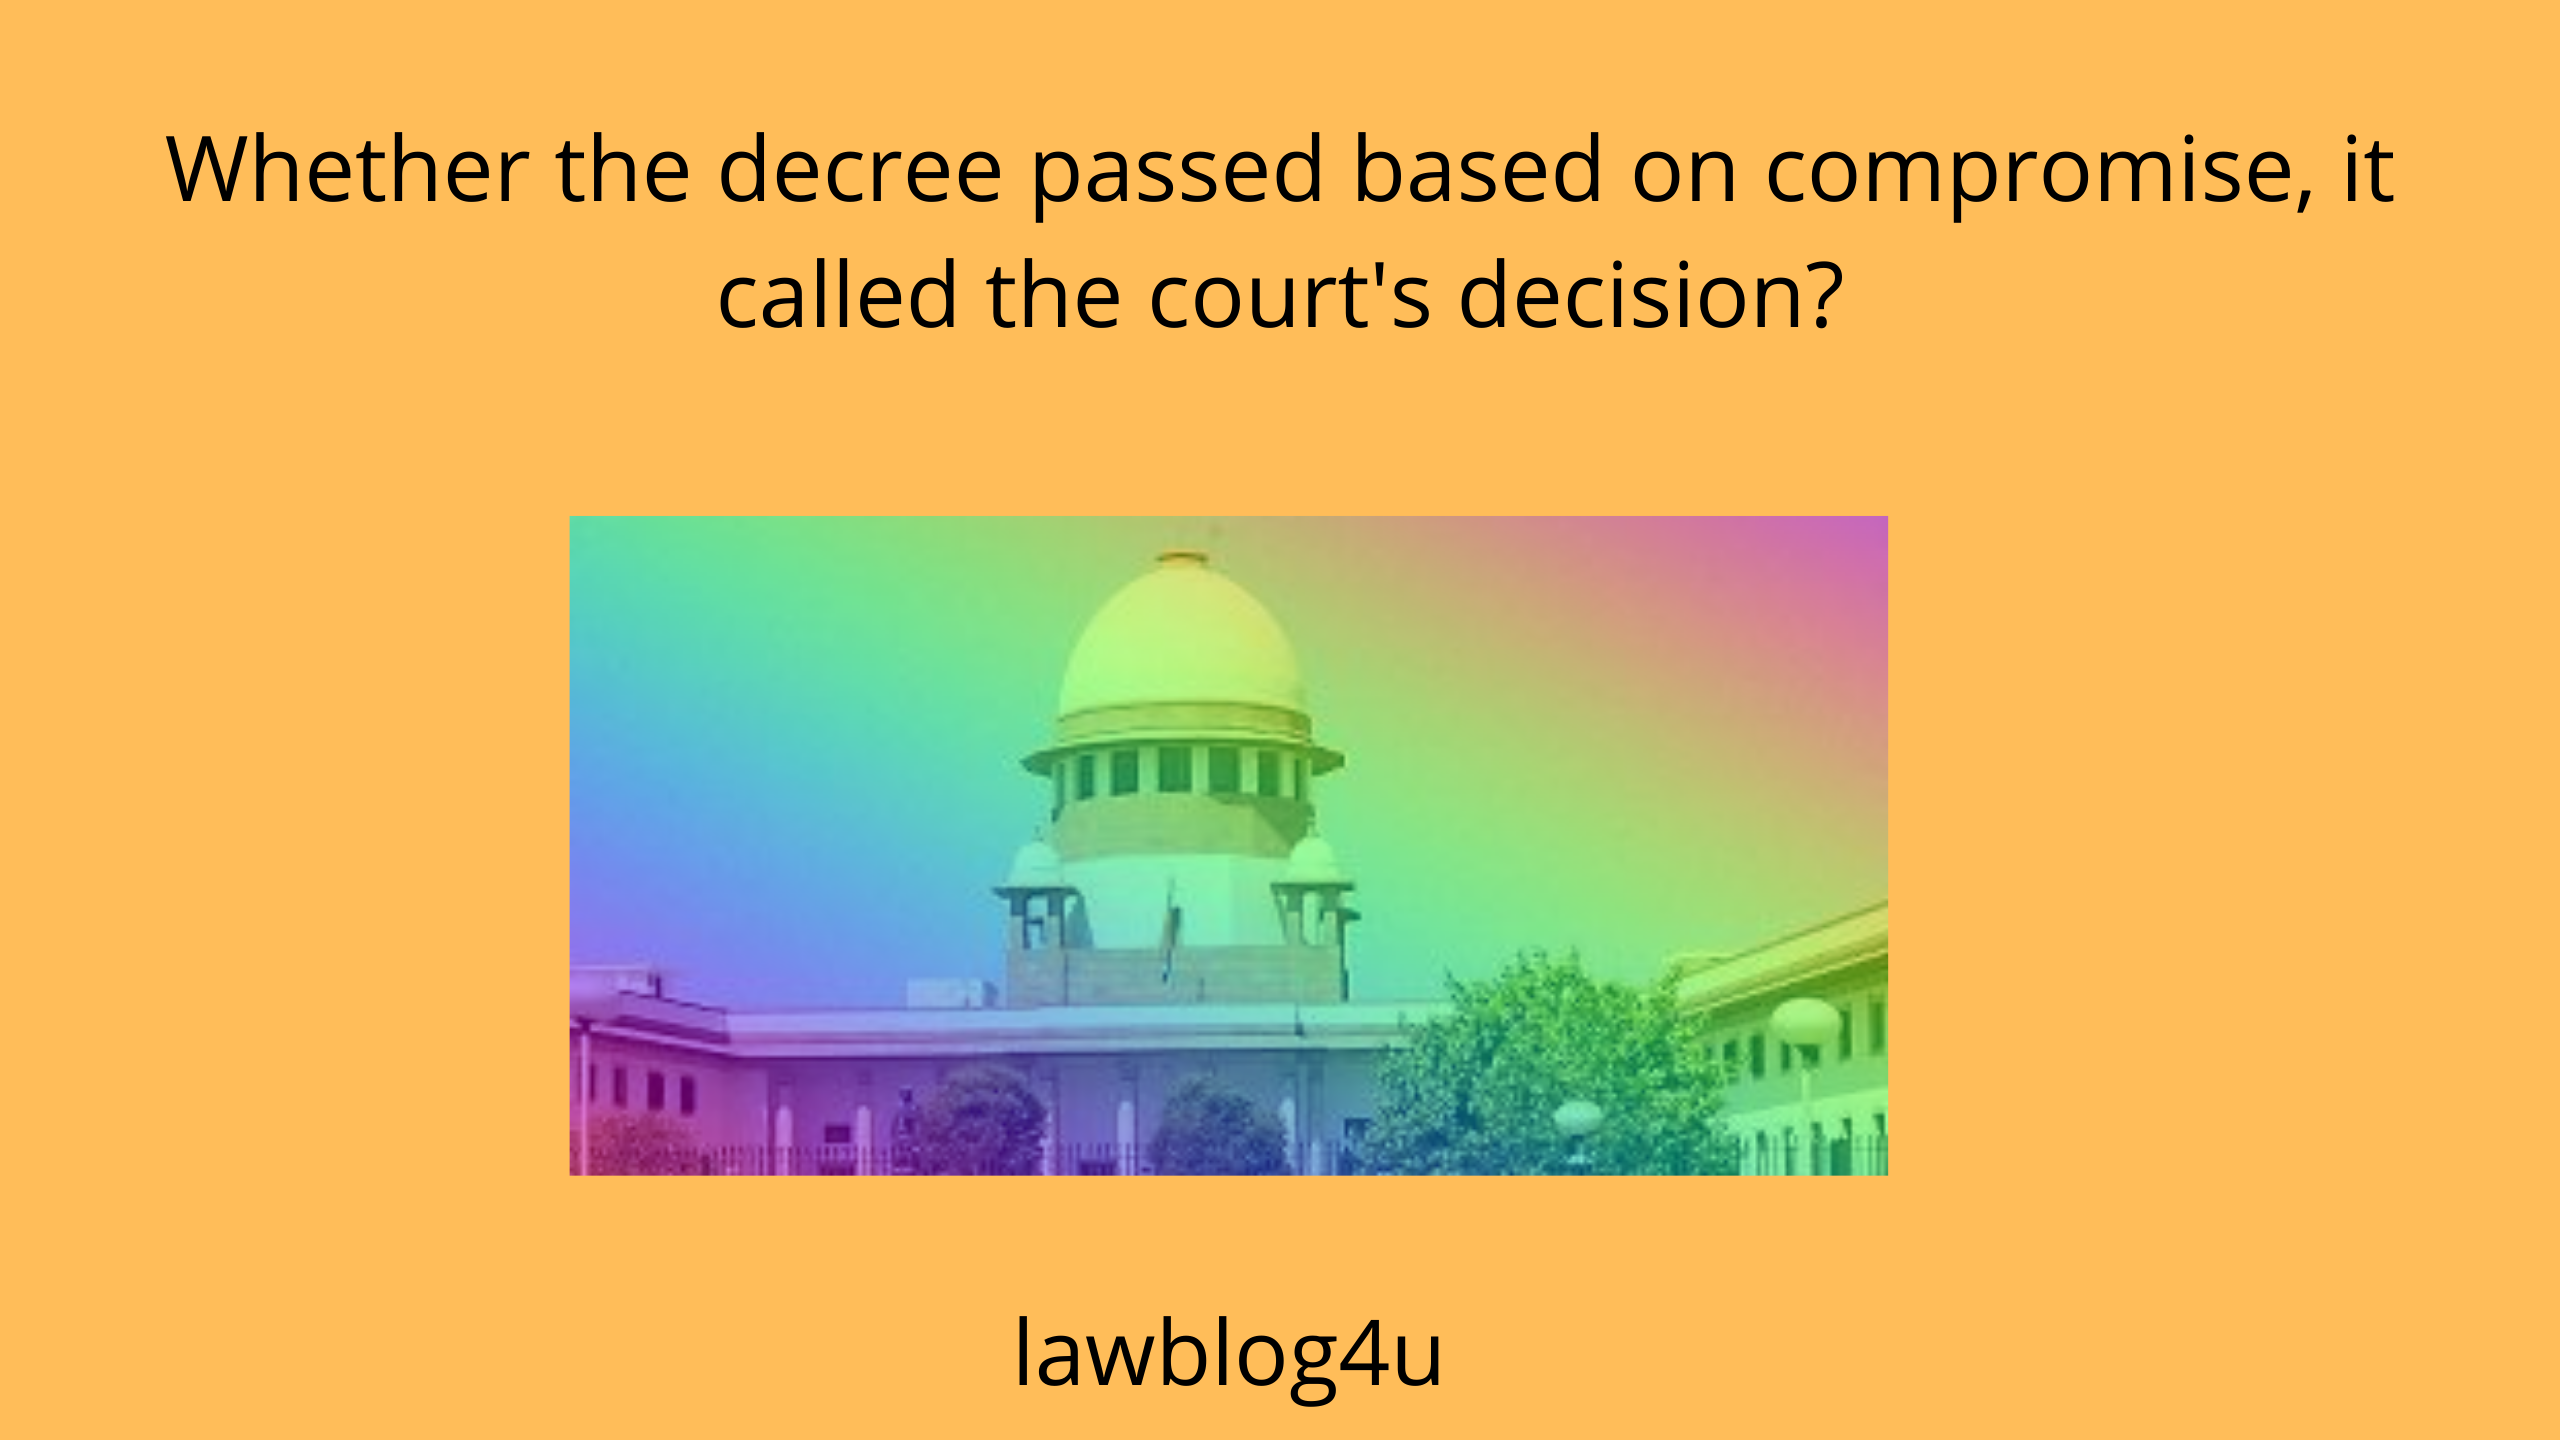 Whether the decree passed based on compromise, it called the court's decision?